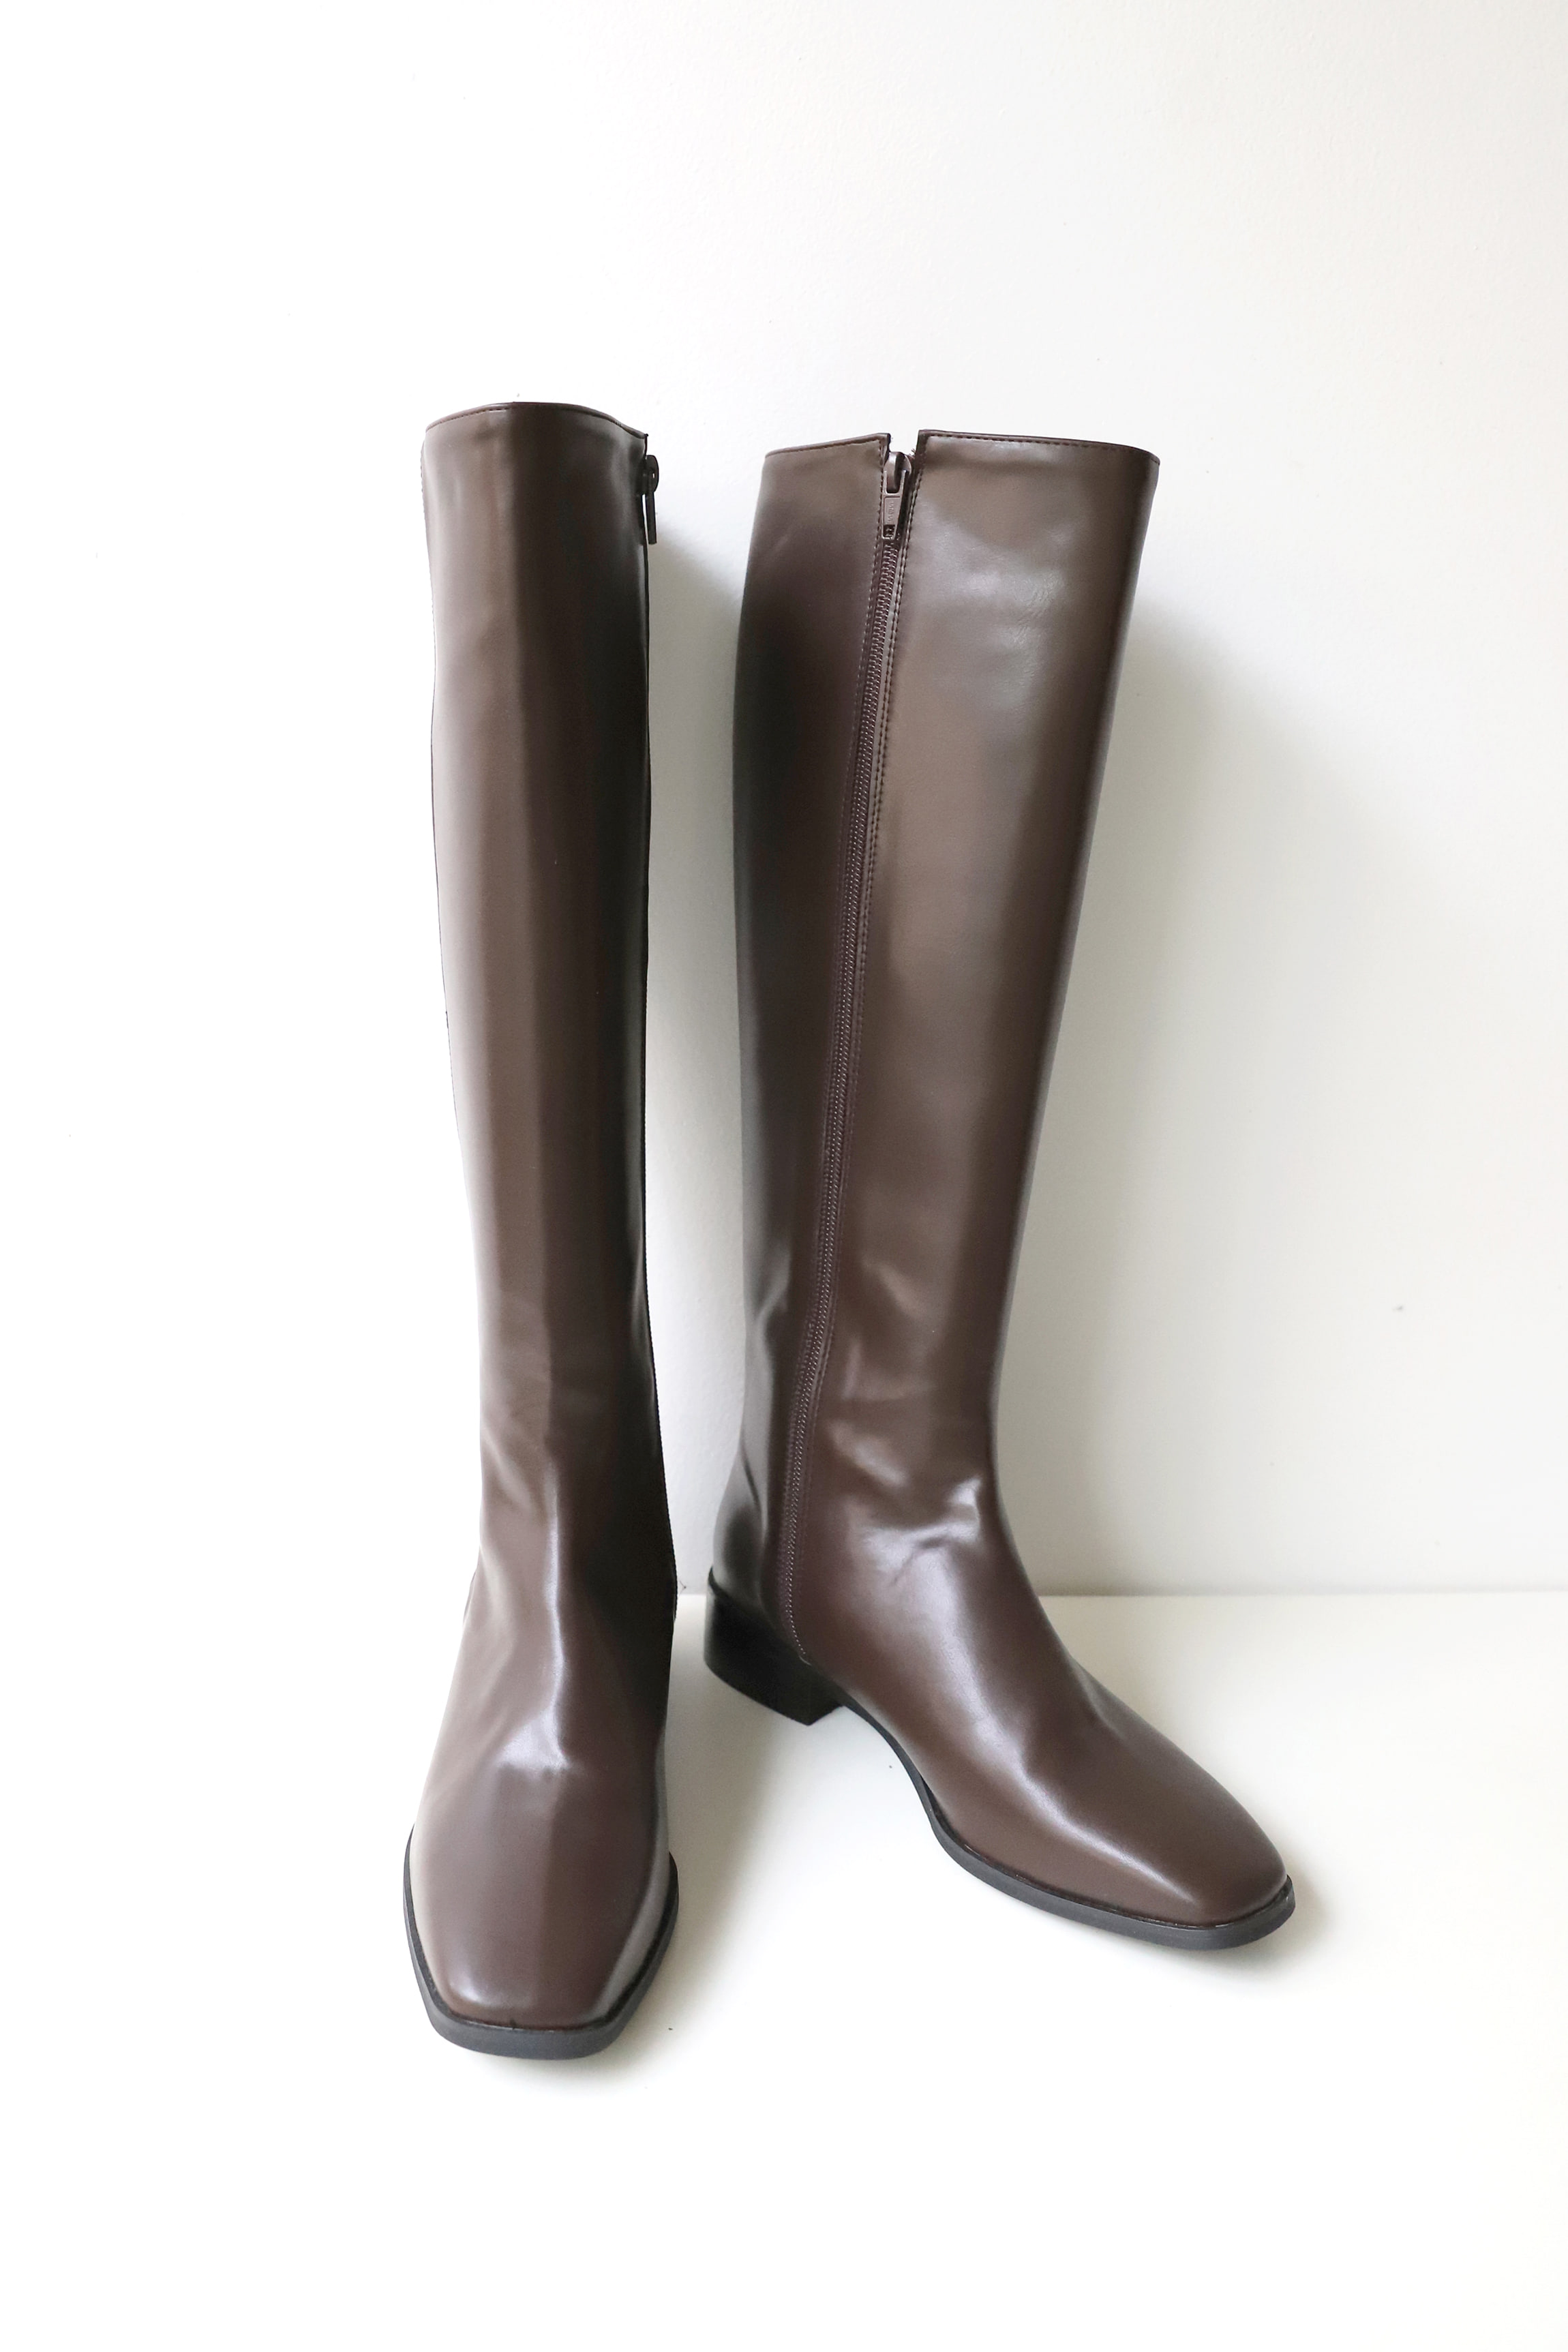 SIMPLE LINE LONG BOOTS(2COLORS)(SOLD OUT)